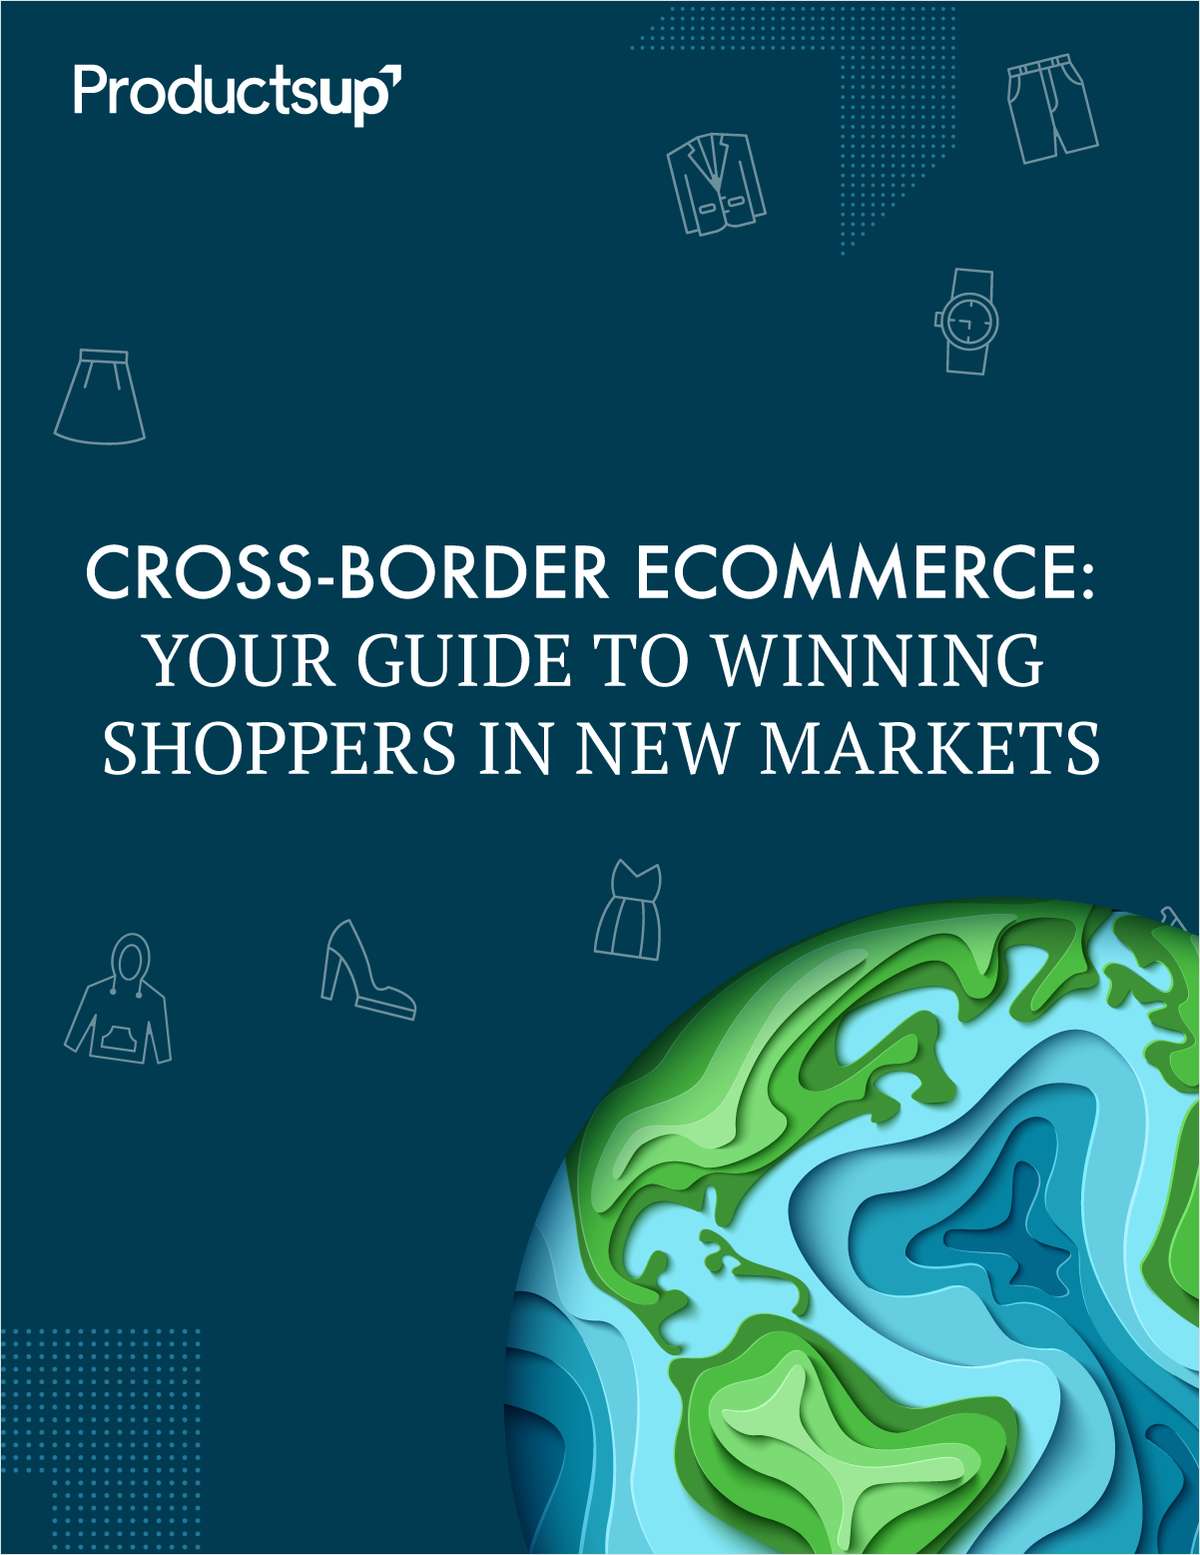 Cross-Border Ecommerce: Your Guide to Winning Shoppers in New Markets